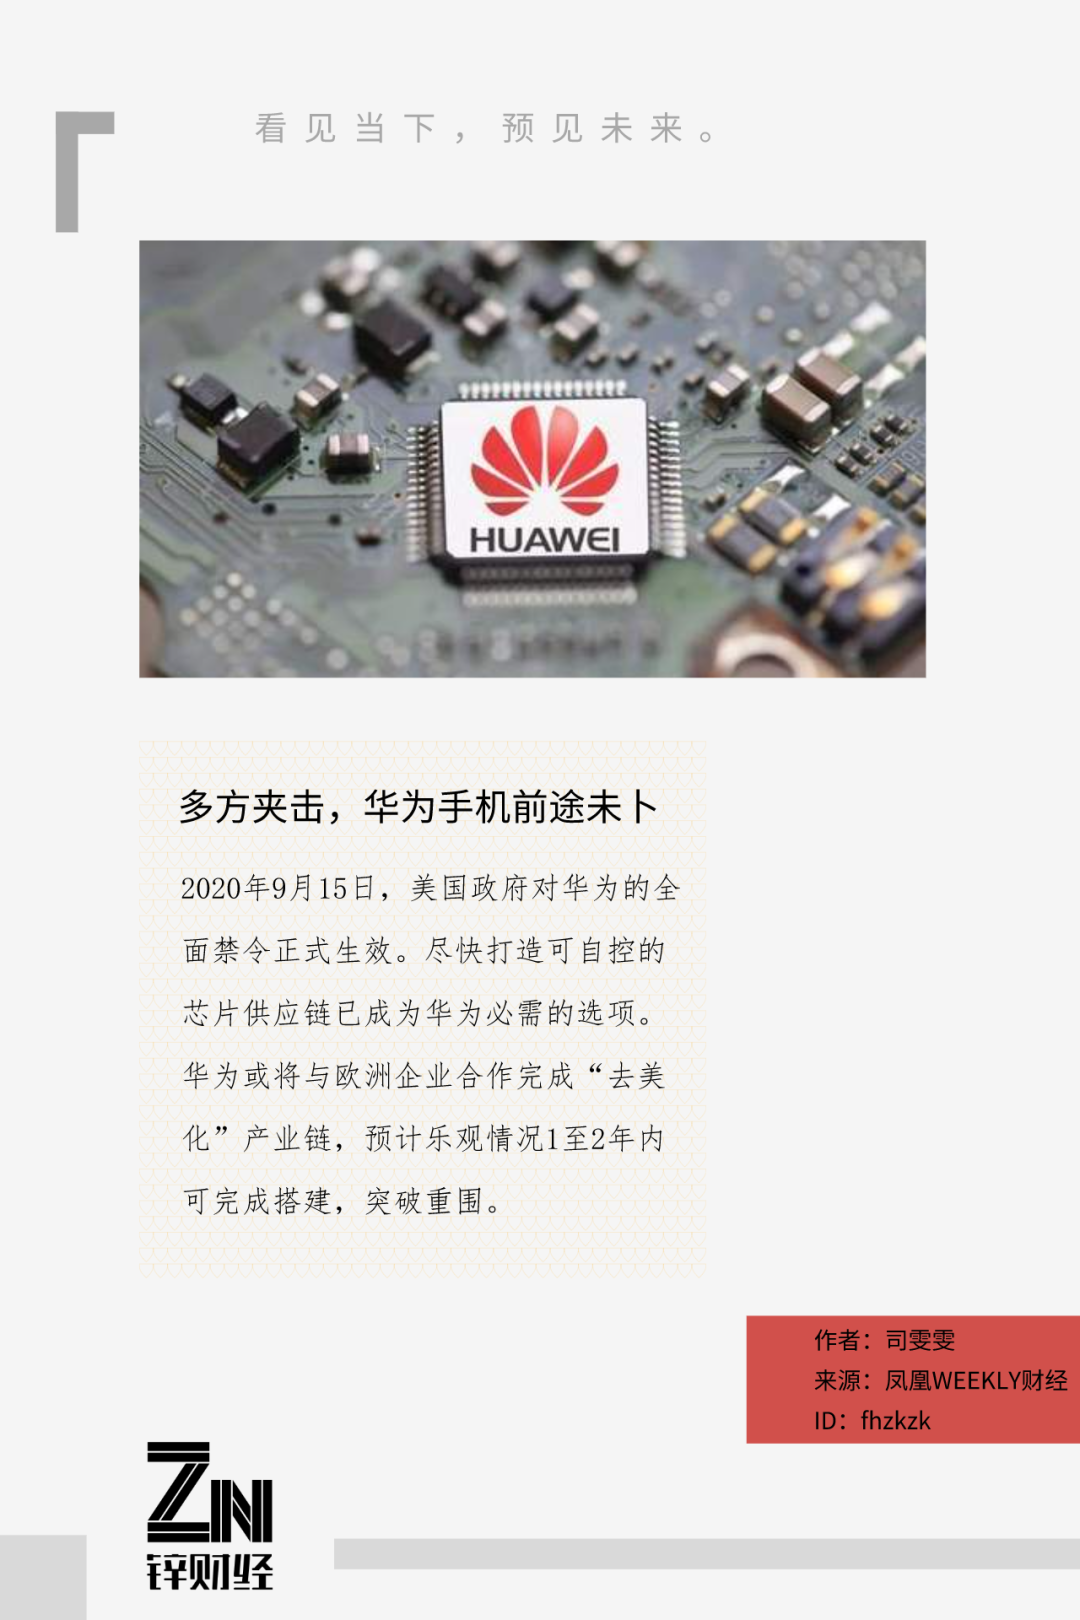 Huawei Battles US Ban By Creating Own Chips